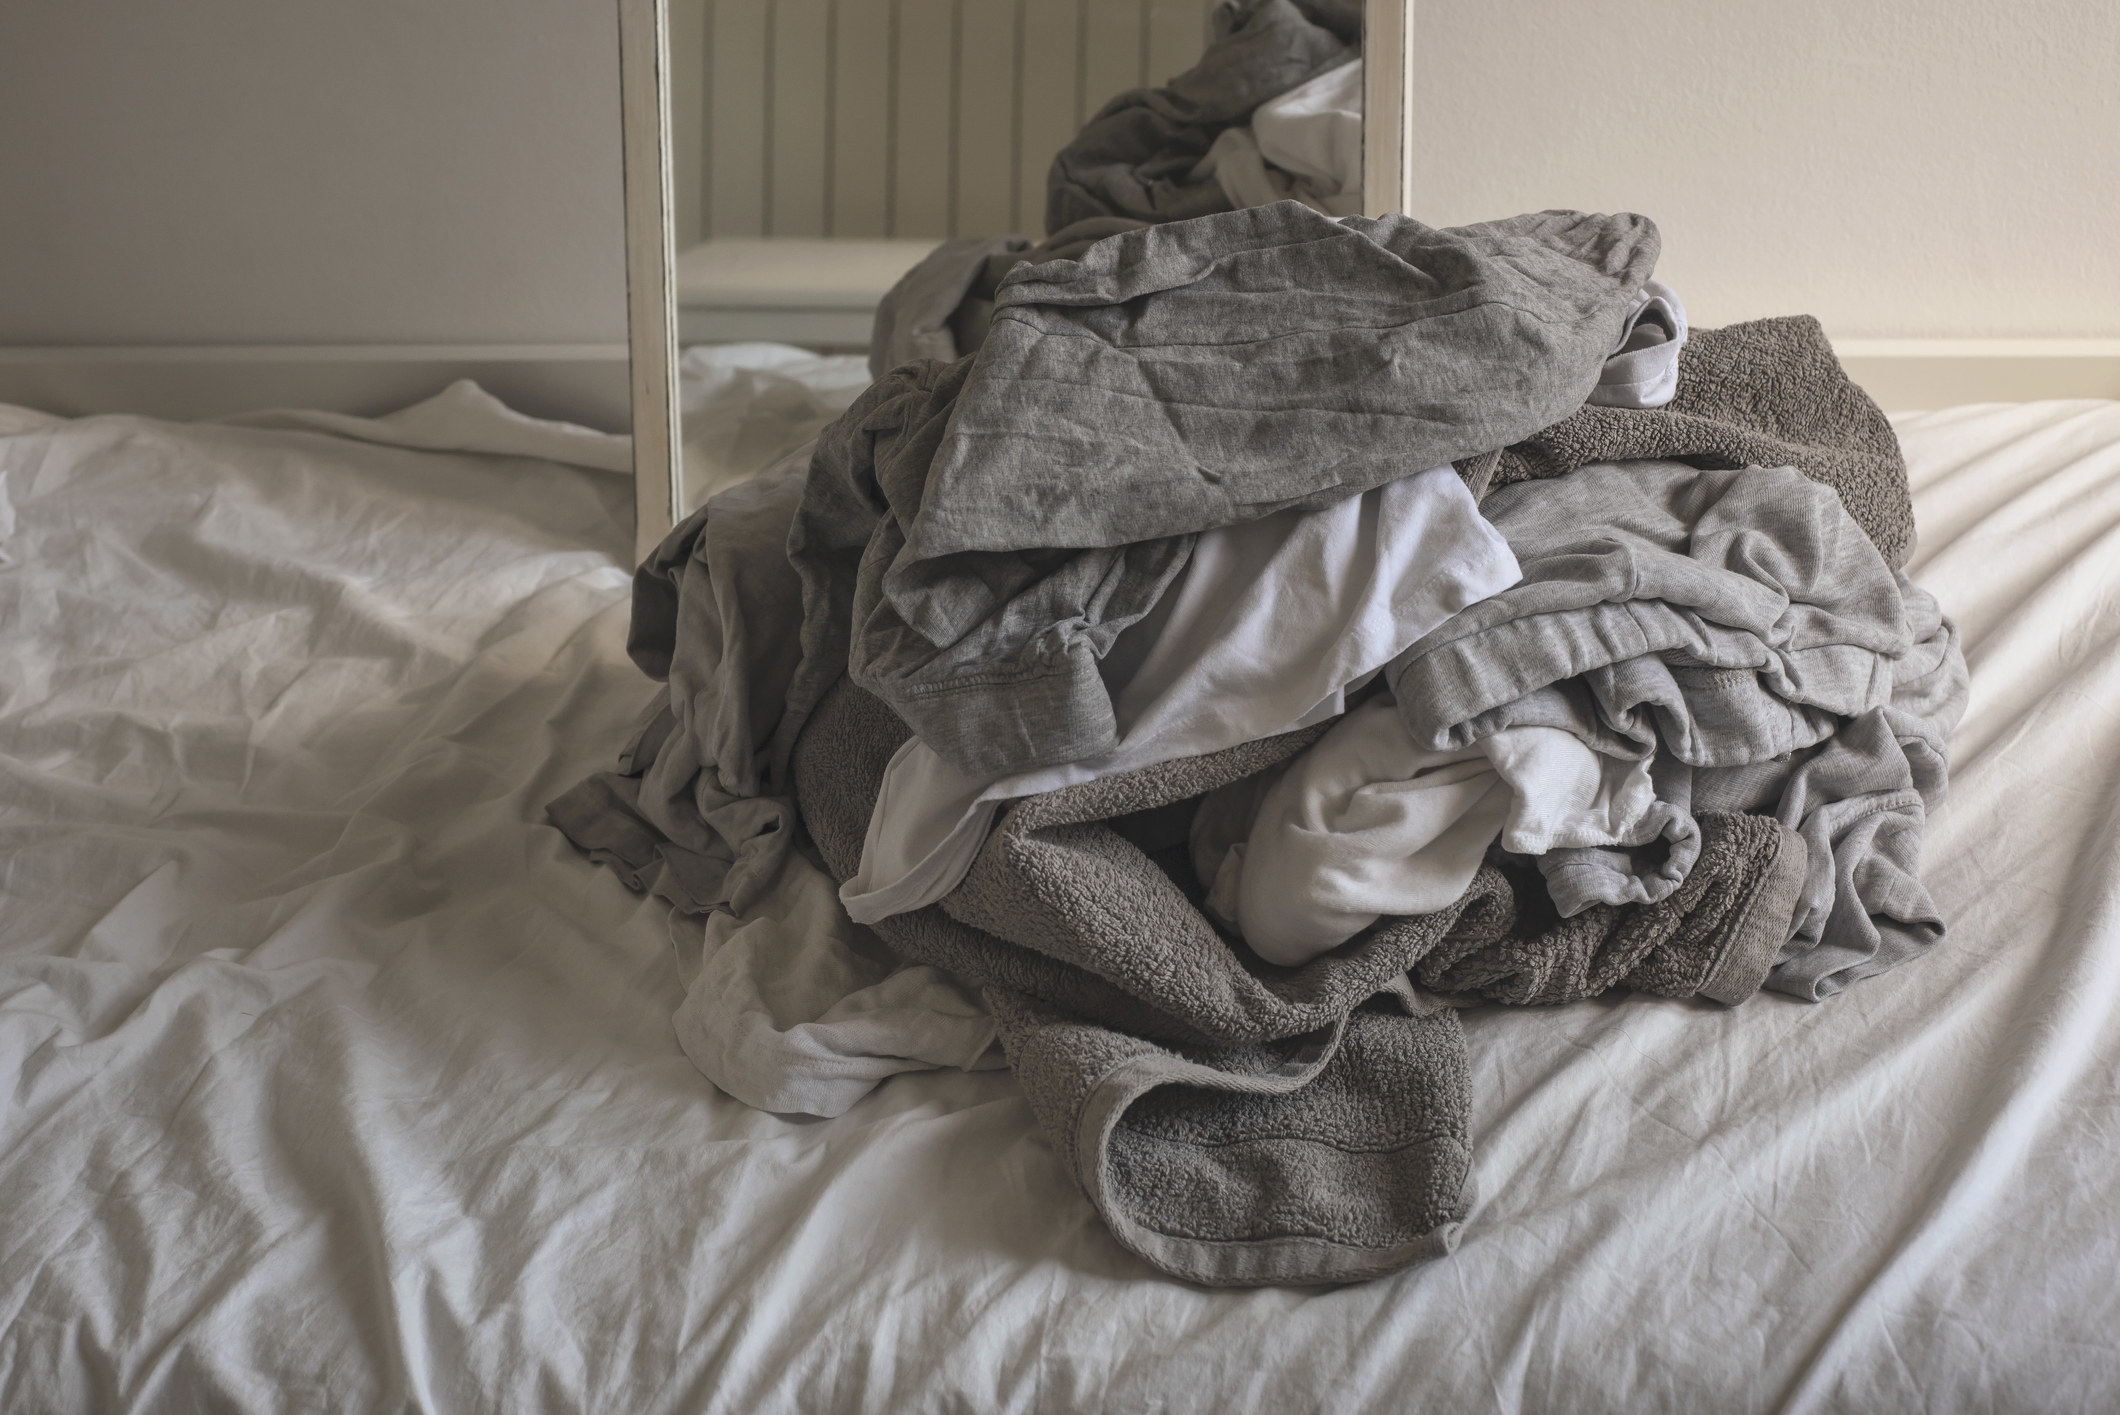 A bed with dirty, crumpled laundry on it